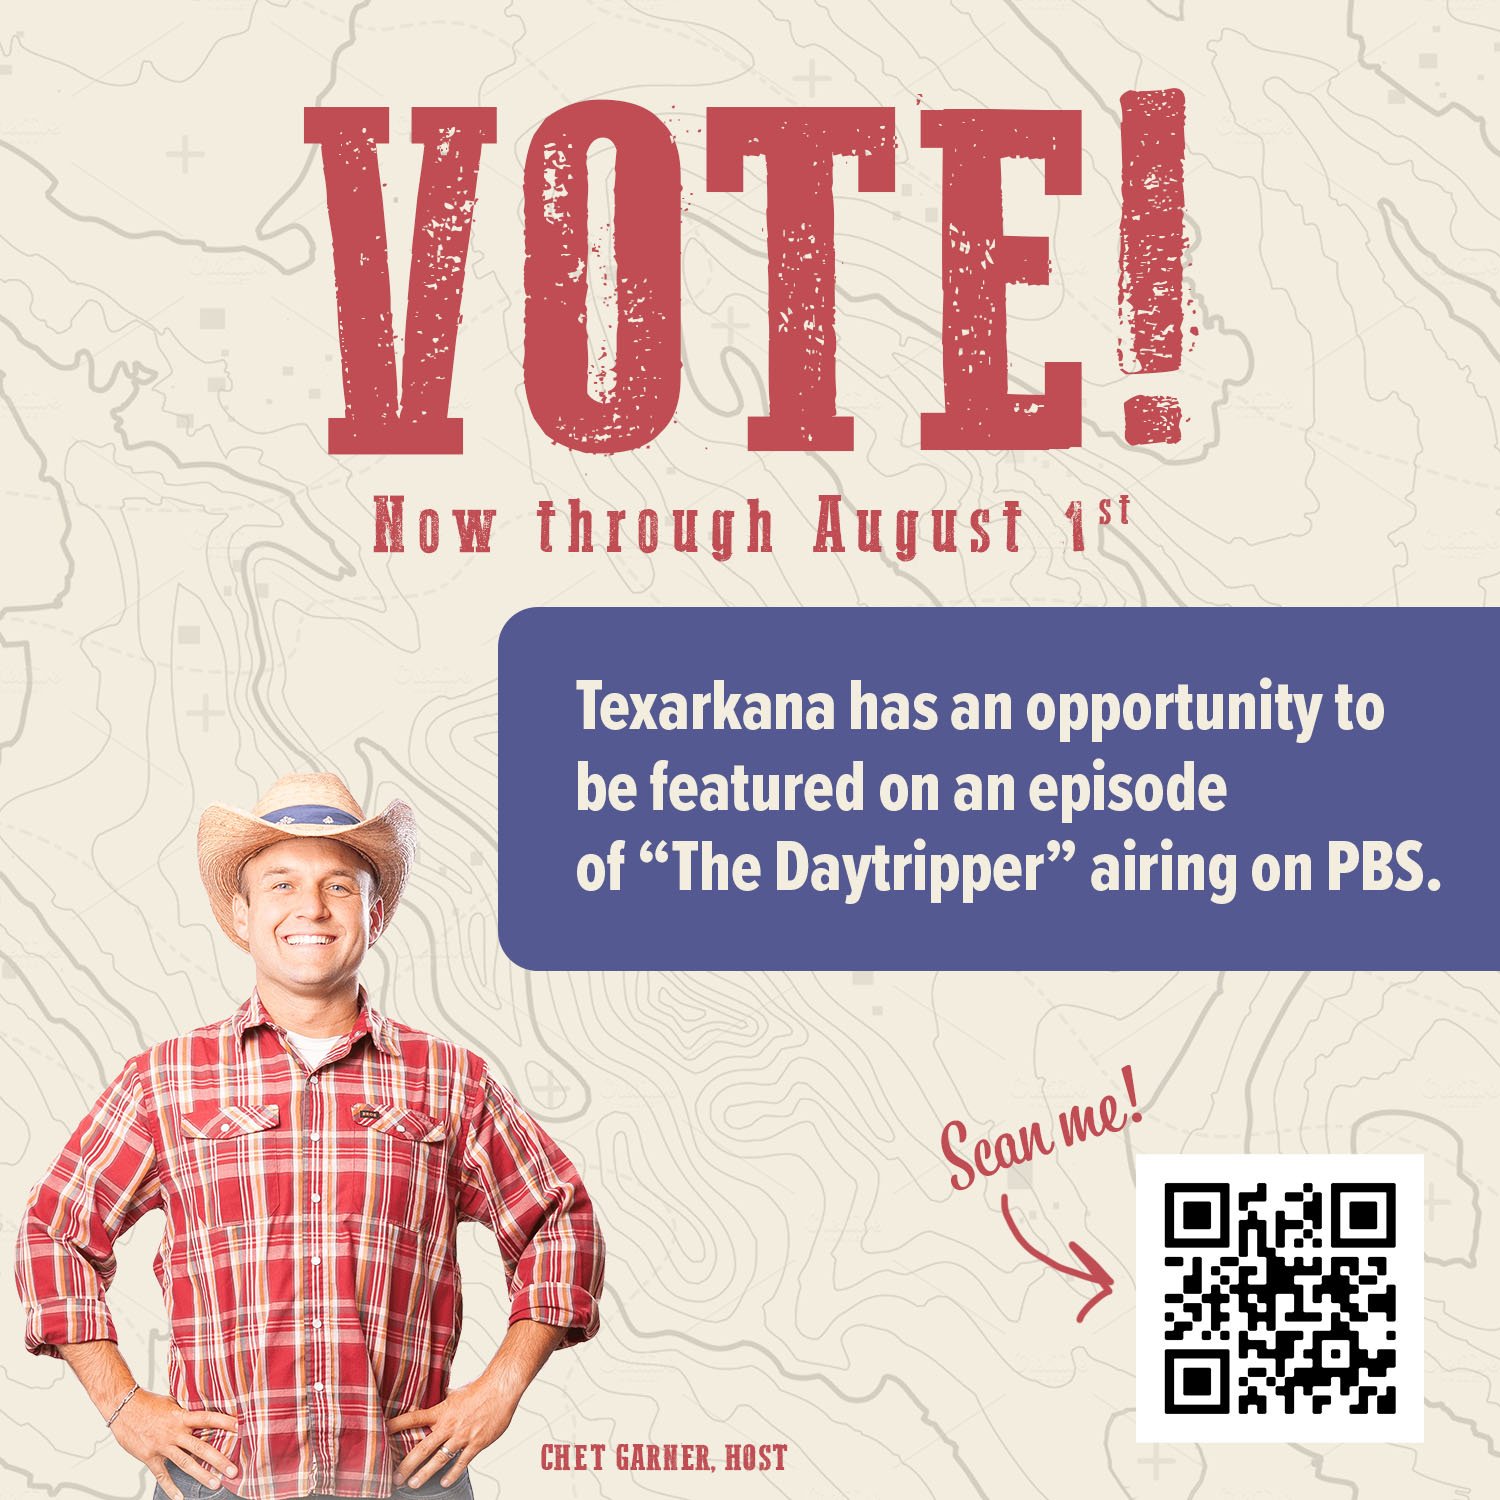 Texarkana Named Finalist for Viewer’s Choice Episode of “The Daytripper”